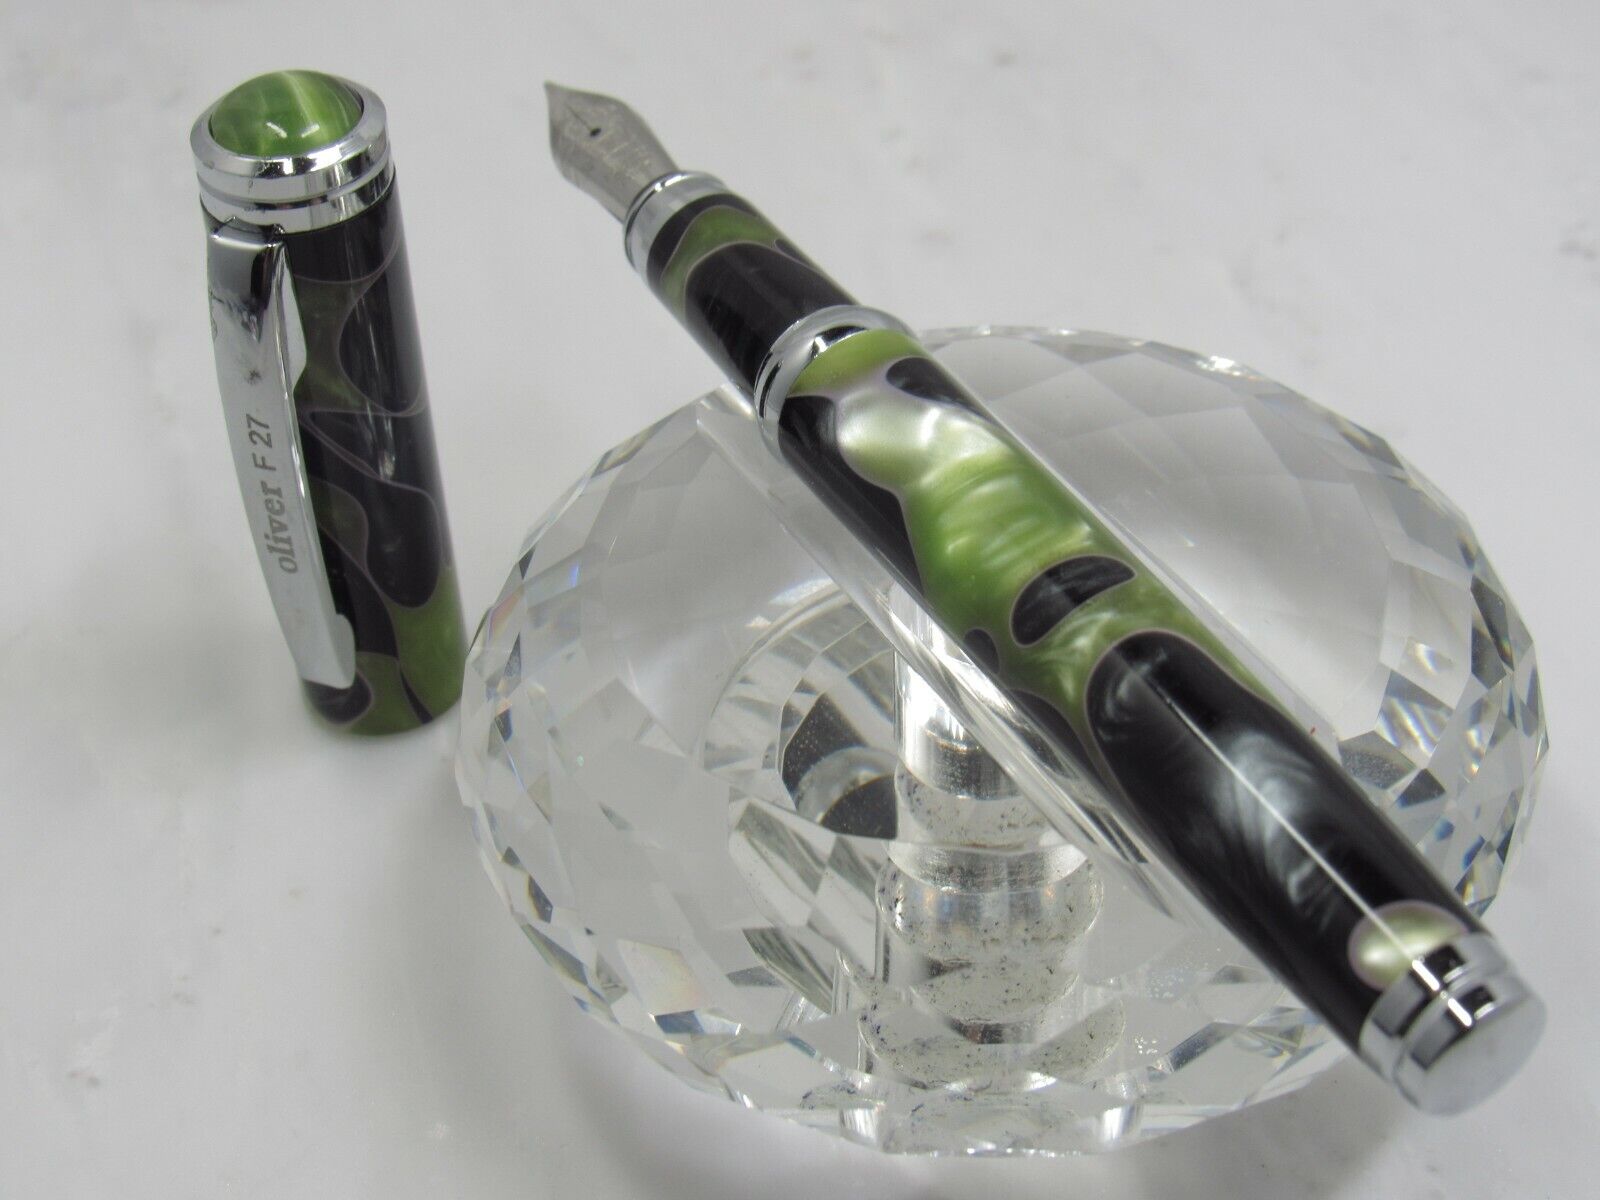 BEAUTIFUL OLIVER ACRYLIC FOUNTAIN PEN MODEL F27 GREEN AND BLACK